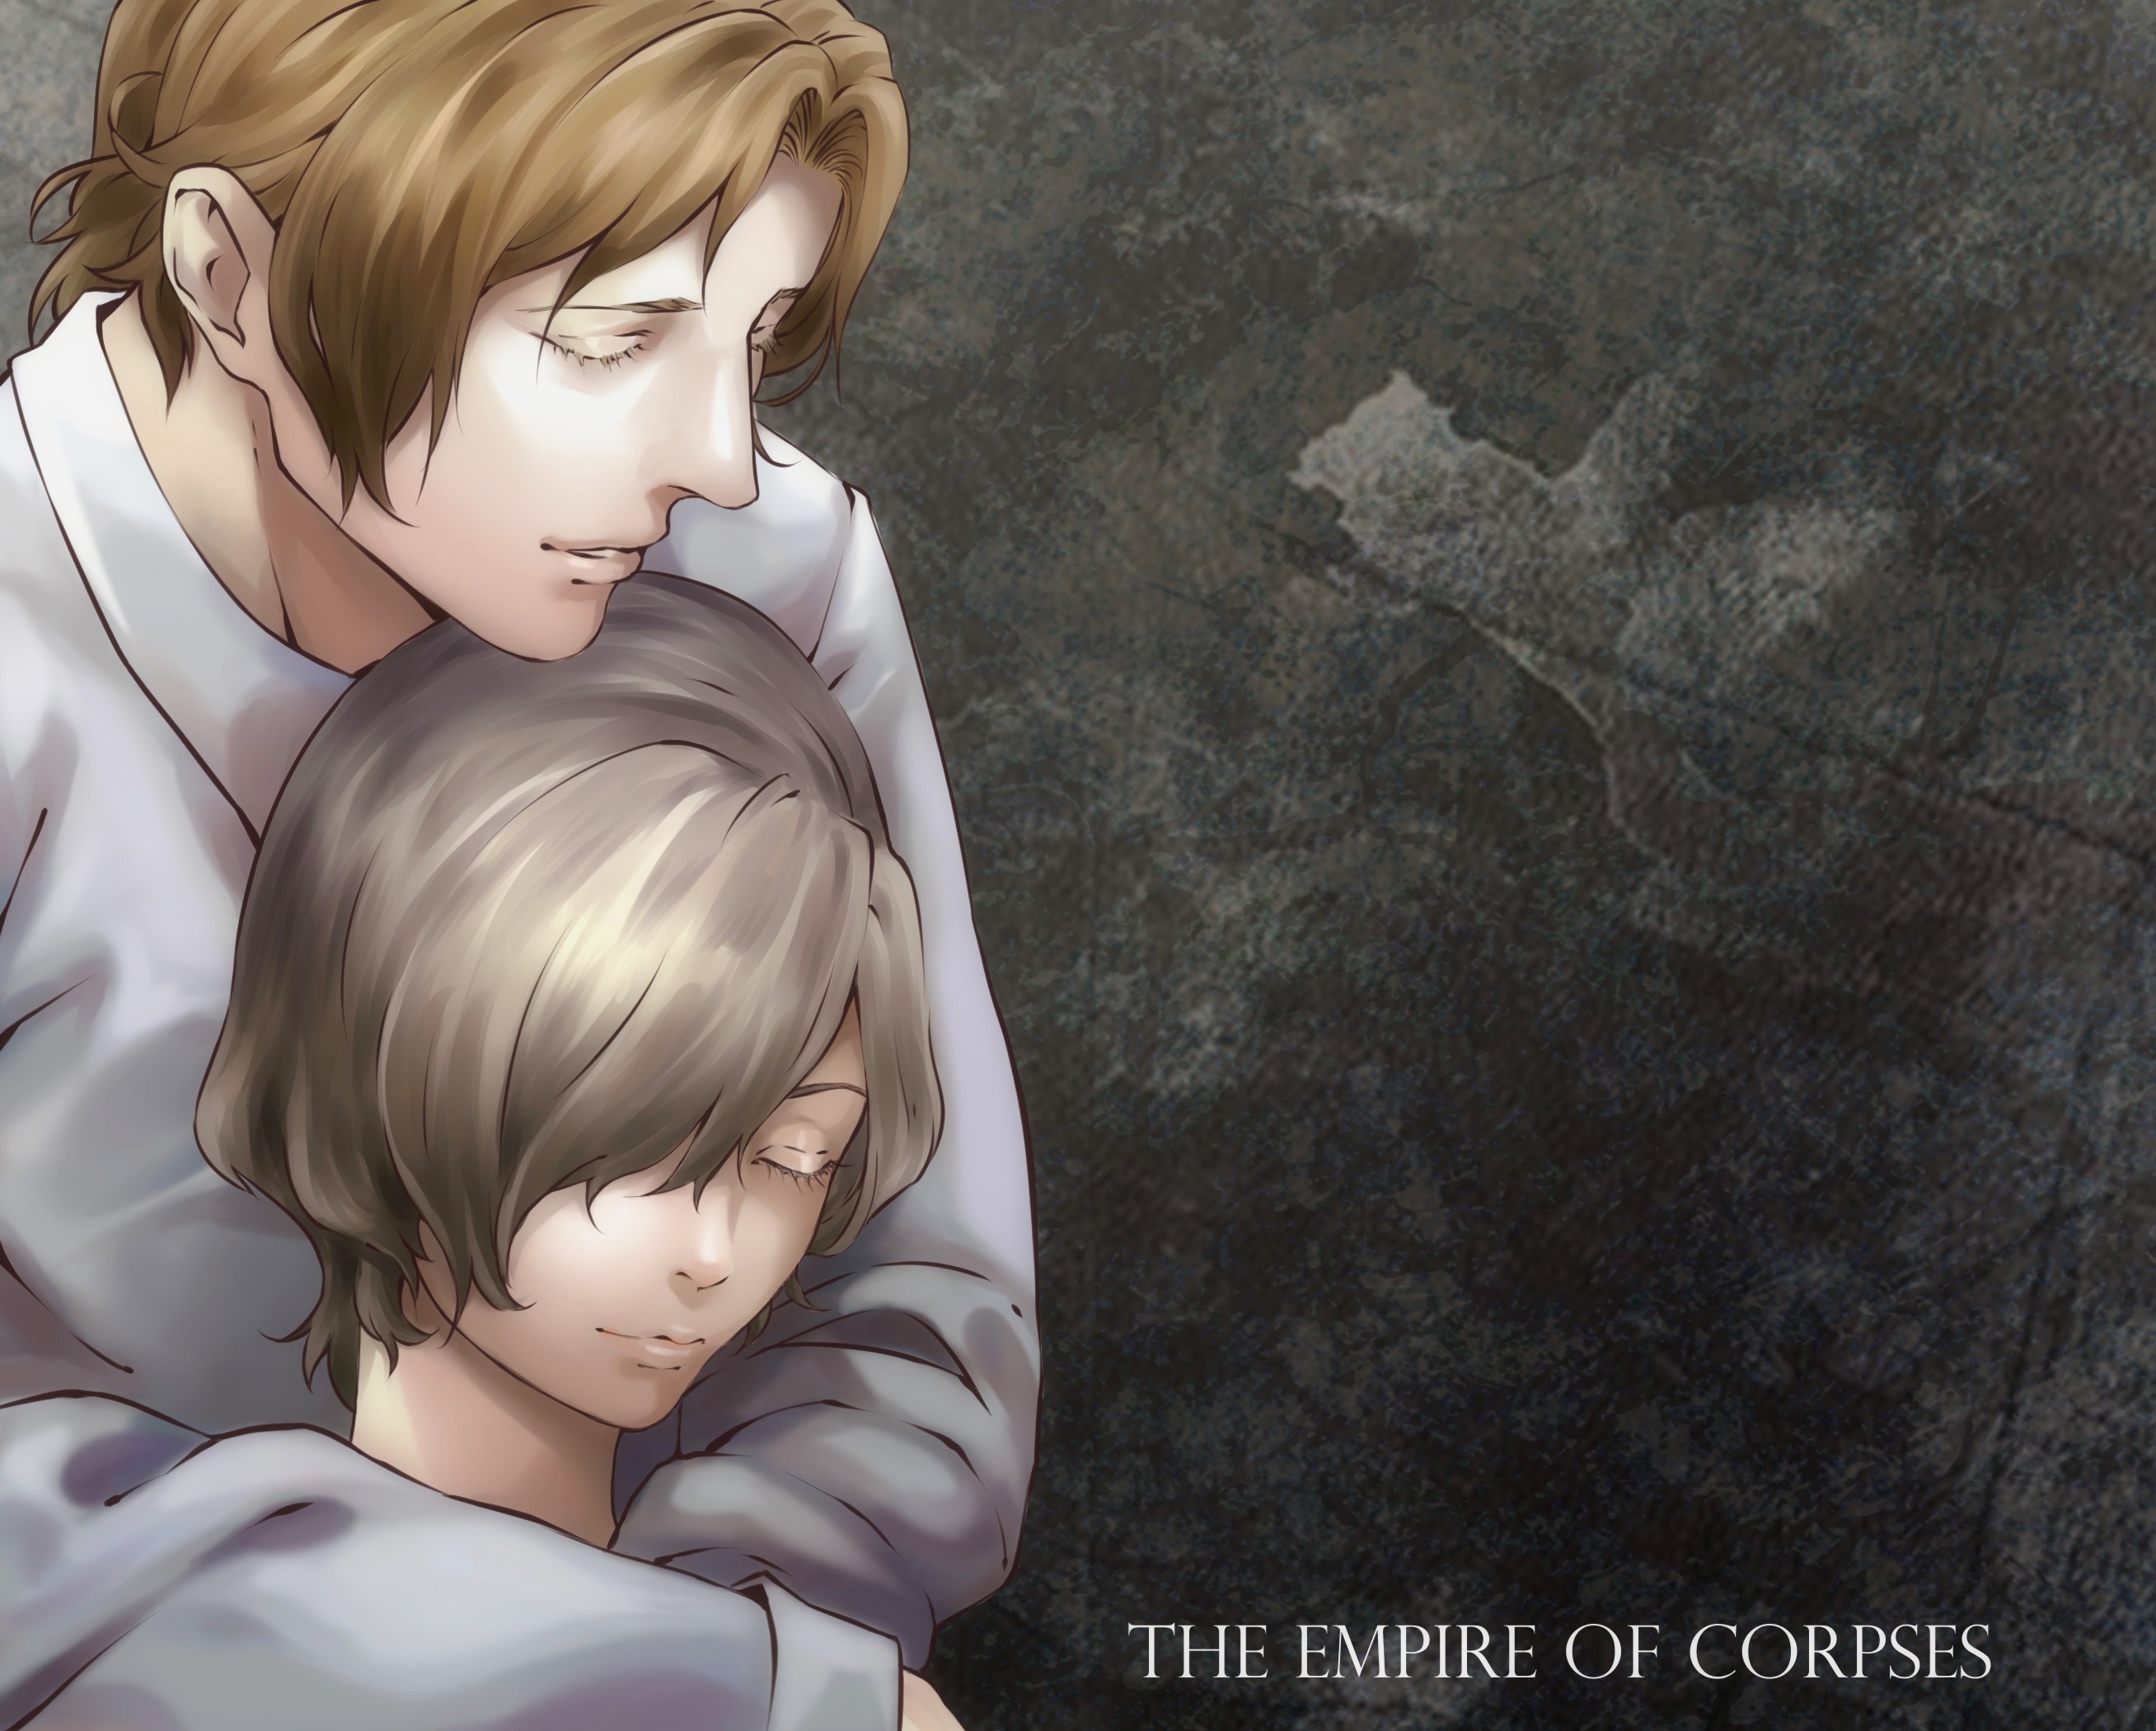 The Empire of Corpses HD Wallpaper